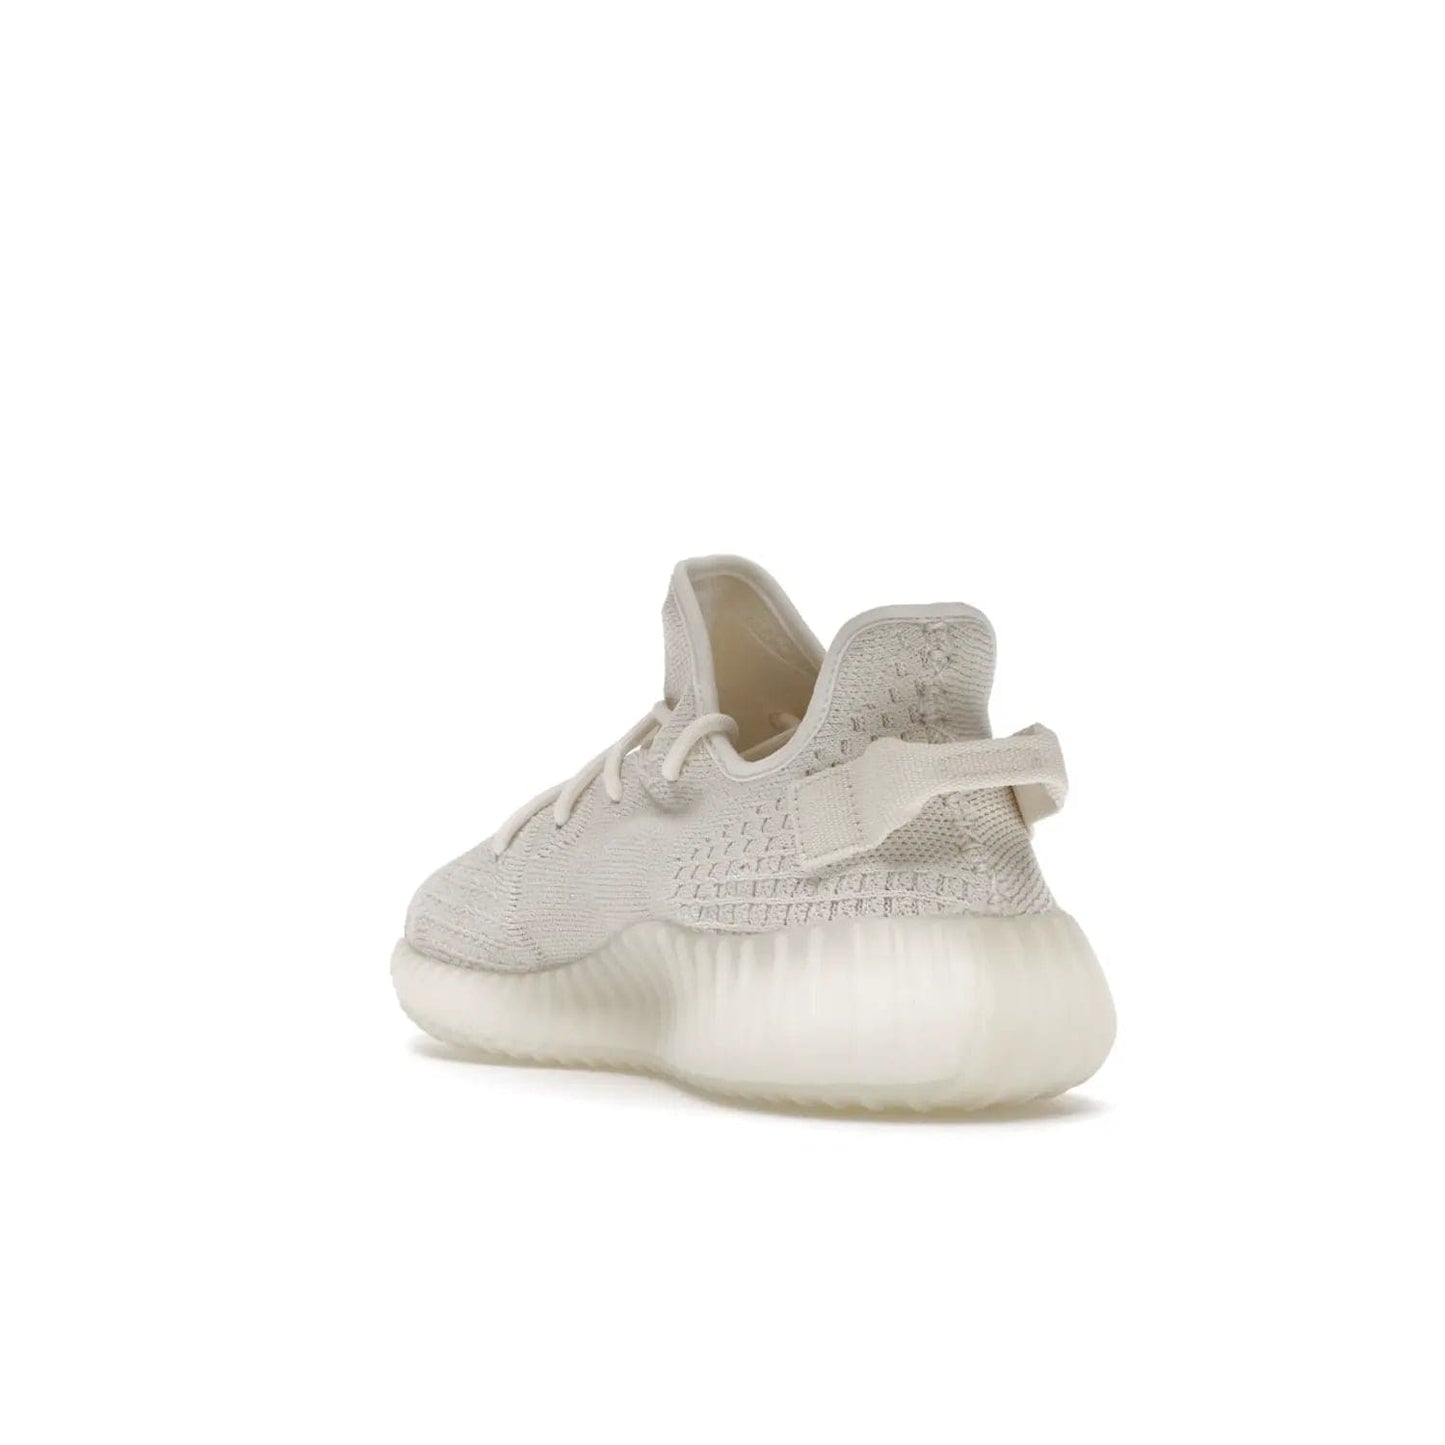 adidas Yeezy Boost 350 V2 Bone - Image 25 - Only at www.BallersClubKickz.com - Grab the stylish and comfortable adidas Yeezy Boost 350 V2 Bone in March 2022. This sneaker features a triple white Primeknit upper, mesh side stripes and canvas heel tabs, sitting atop a semi-translucent sole with Boost technology. Sure to keep your feet comfortable and stylish!